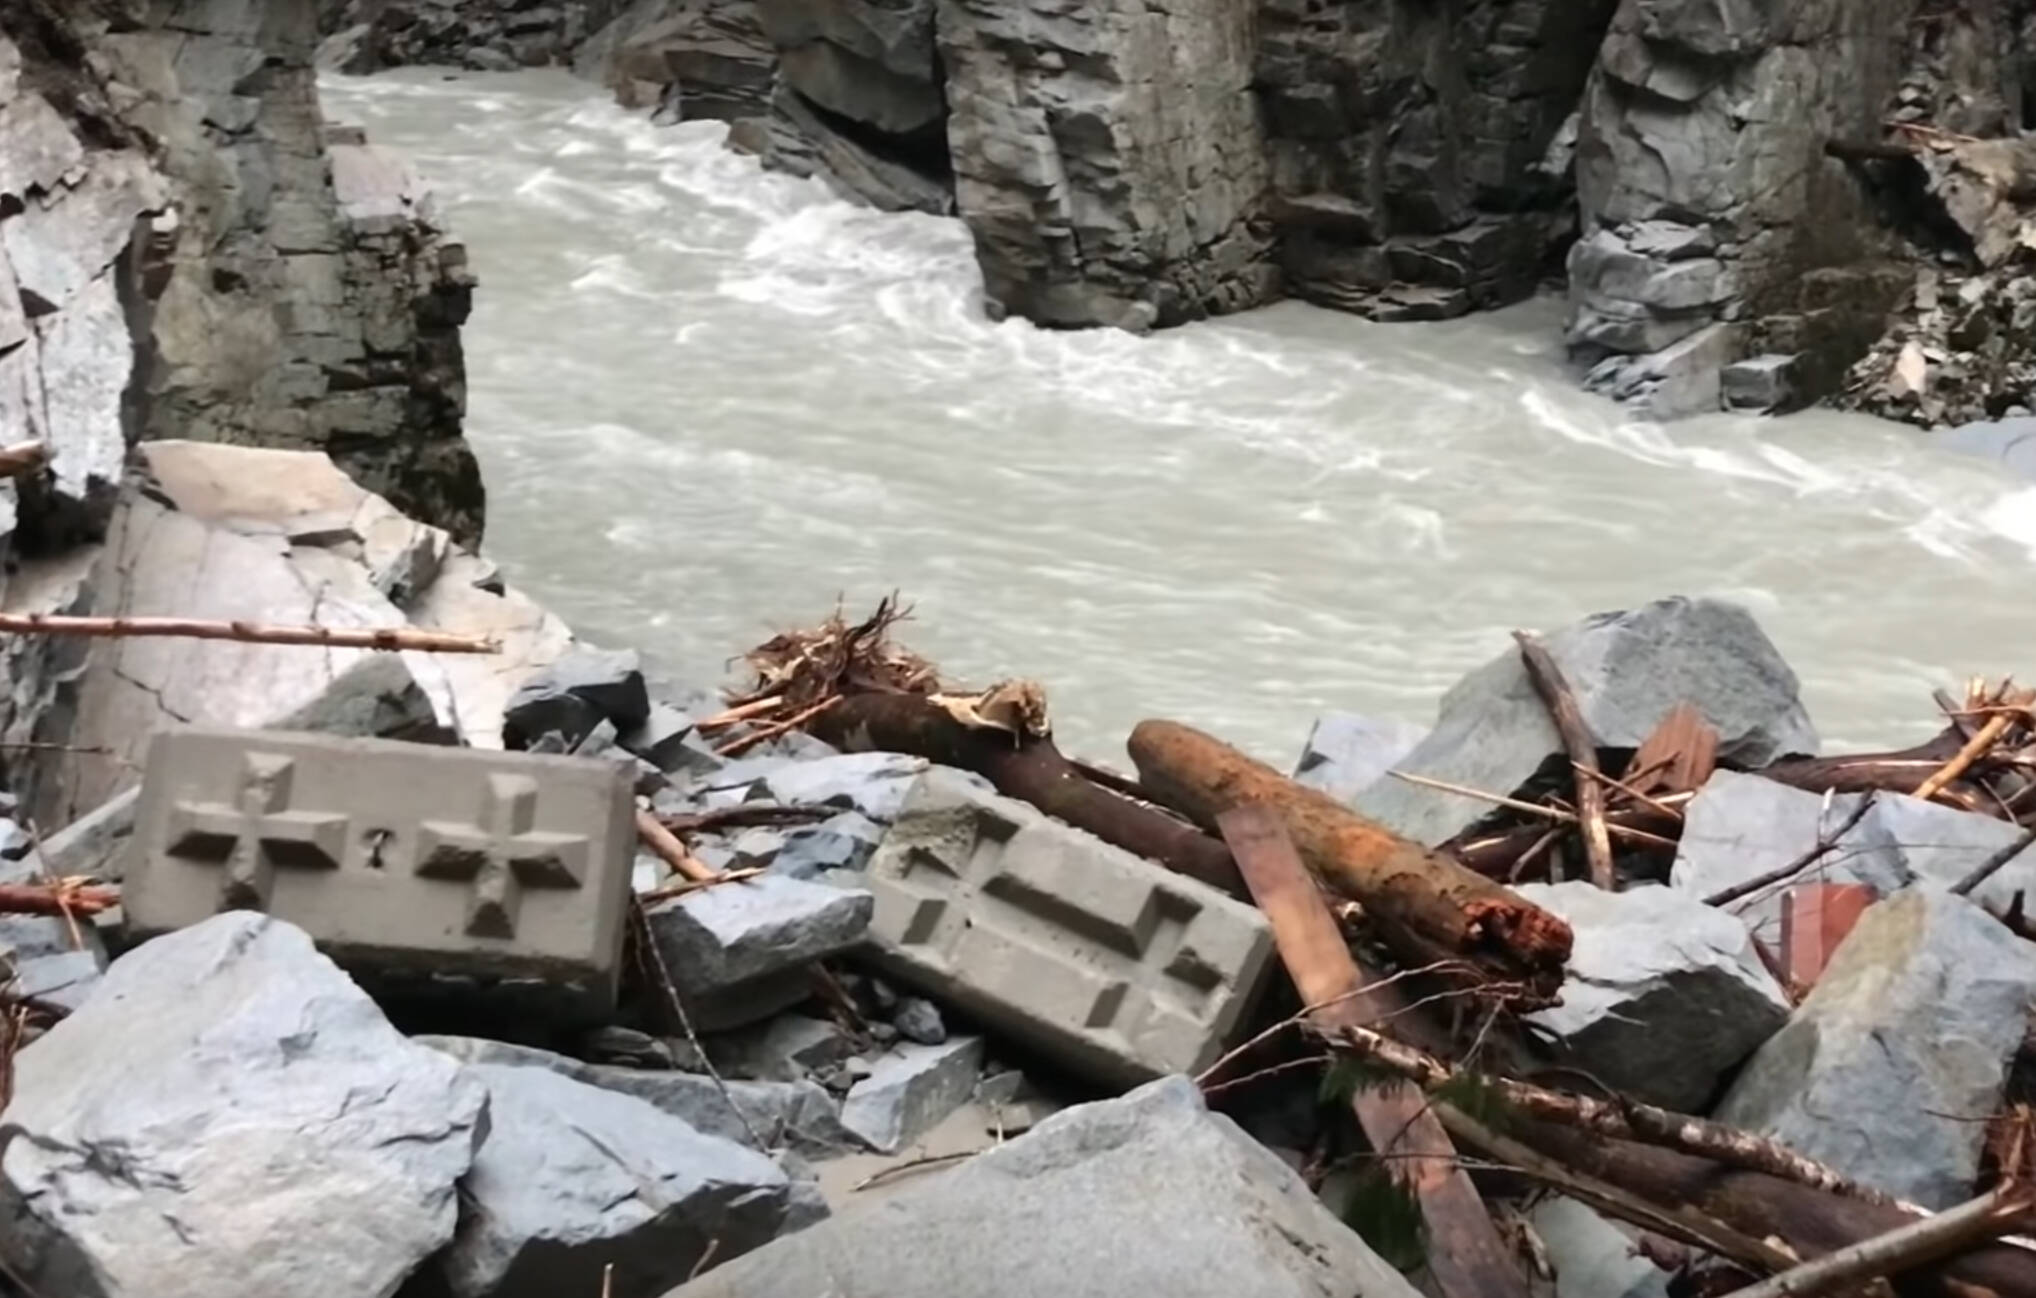 Massive cinder blocks were knocked out of place by flooding at the Othello Tunnels. (Adventures R Us YouTube screenshot)